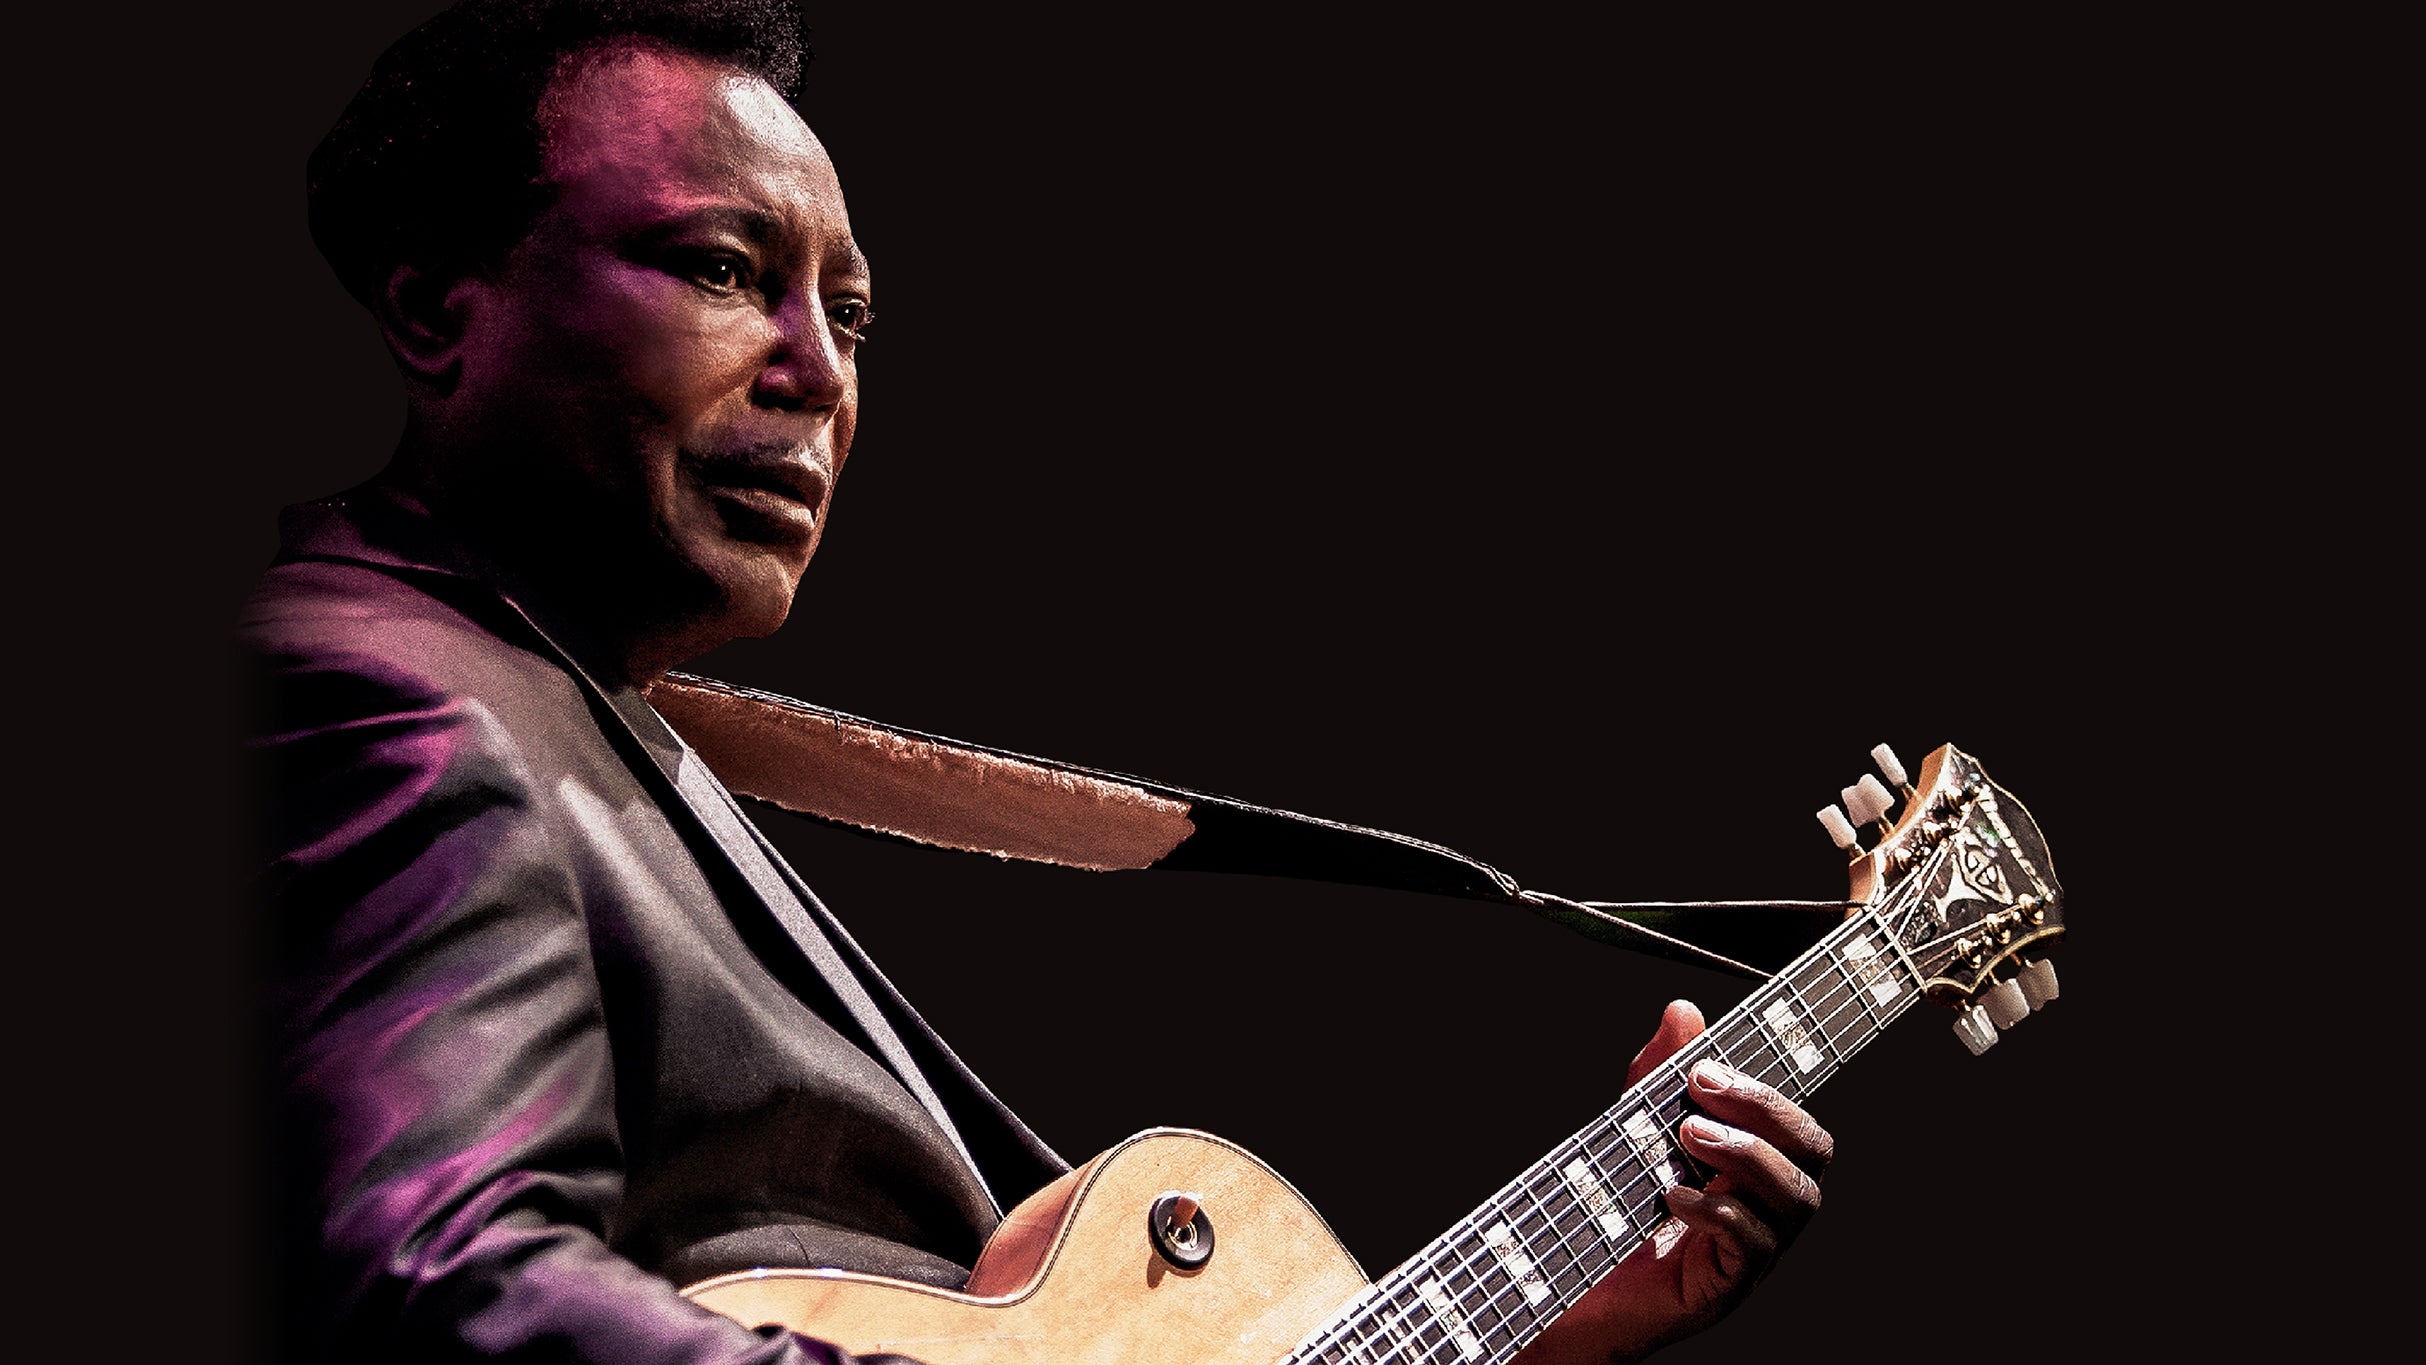 George Benson & Boney James with Lalah Hathaway free presale pasword for early tickets in Lincoln